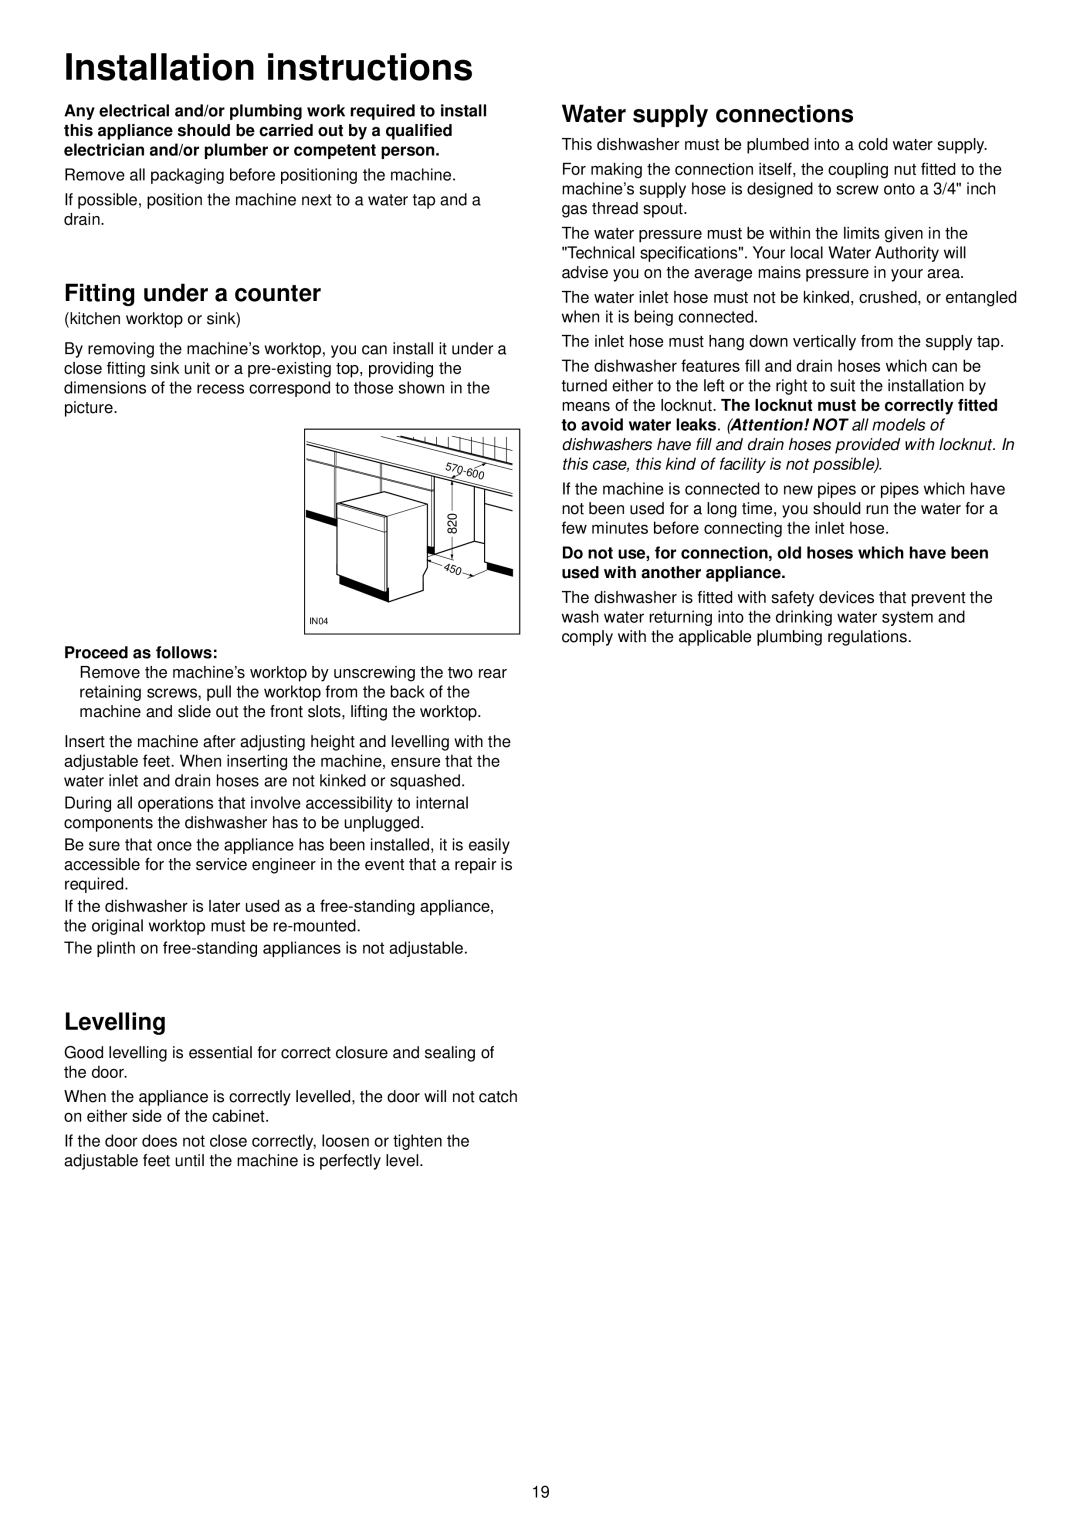 Tricity Bendix TDS 200 manual Installation instructions, Fitting under a counter, Levelling, Water supply connections 